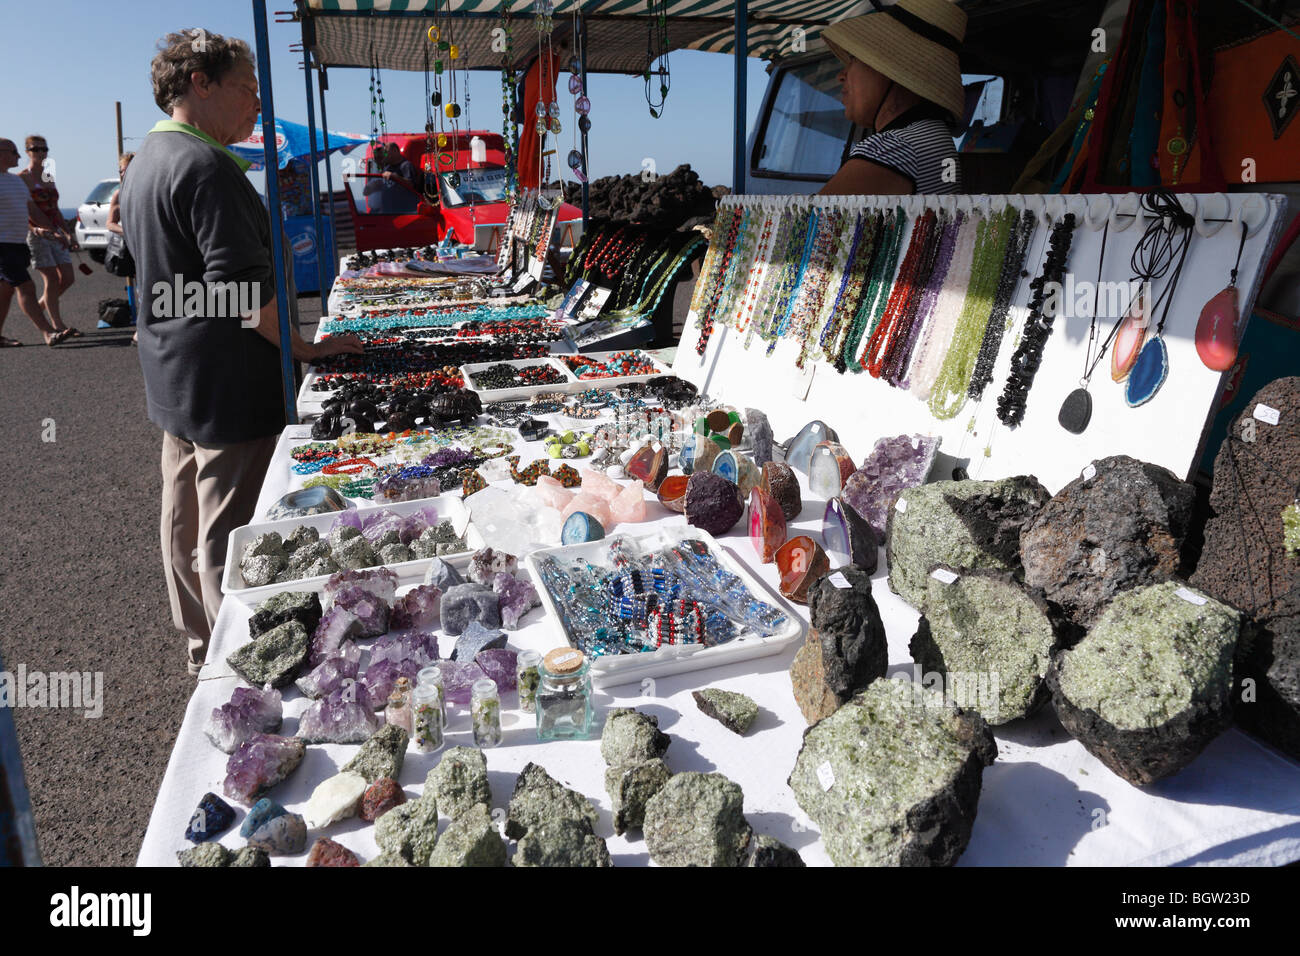 Stall selling olivine and other gemstones, Lanzarote, Canary Islands, Spain, Europe Stock Photo